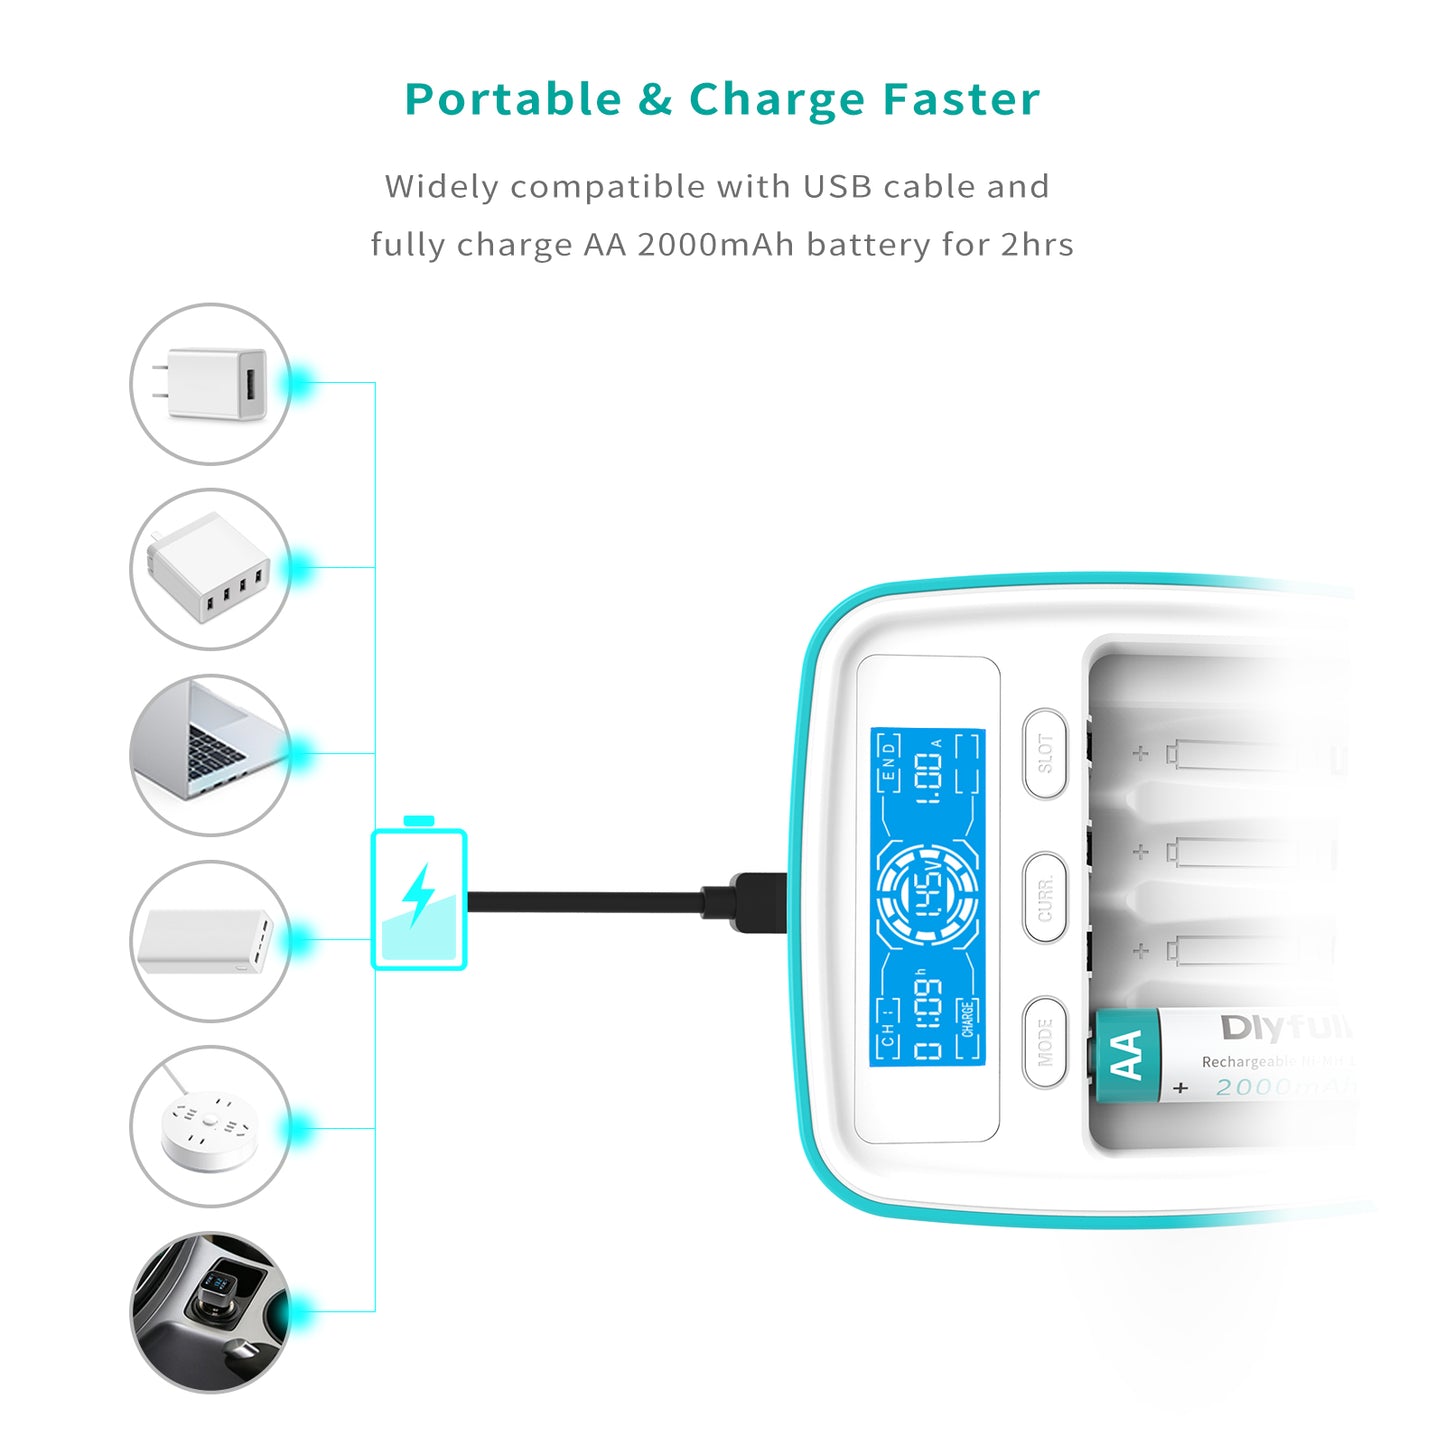 Dlyfull UT1 battery charger USB charger Ni-MH charger for AA AAA batteries with LCD display capacity test function